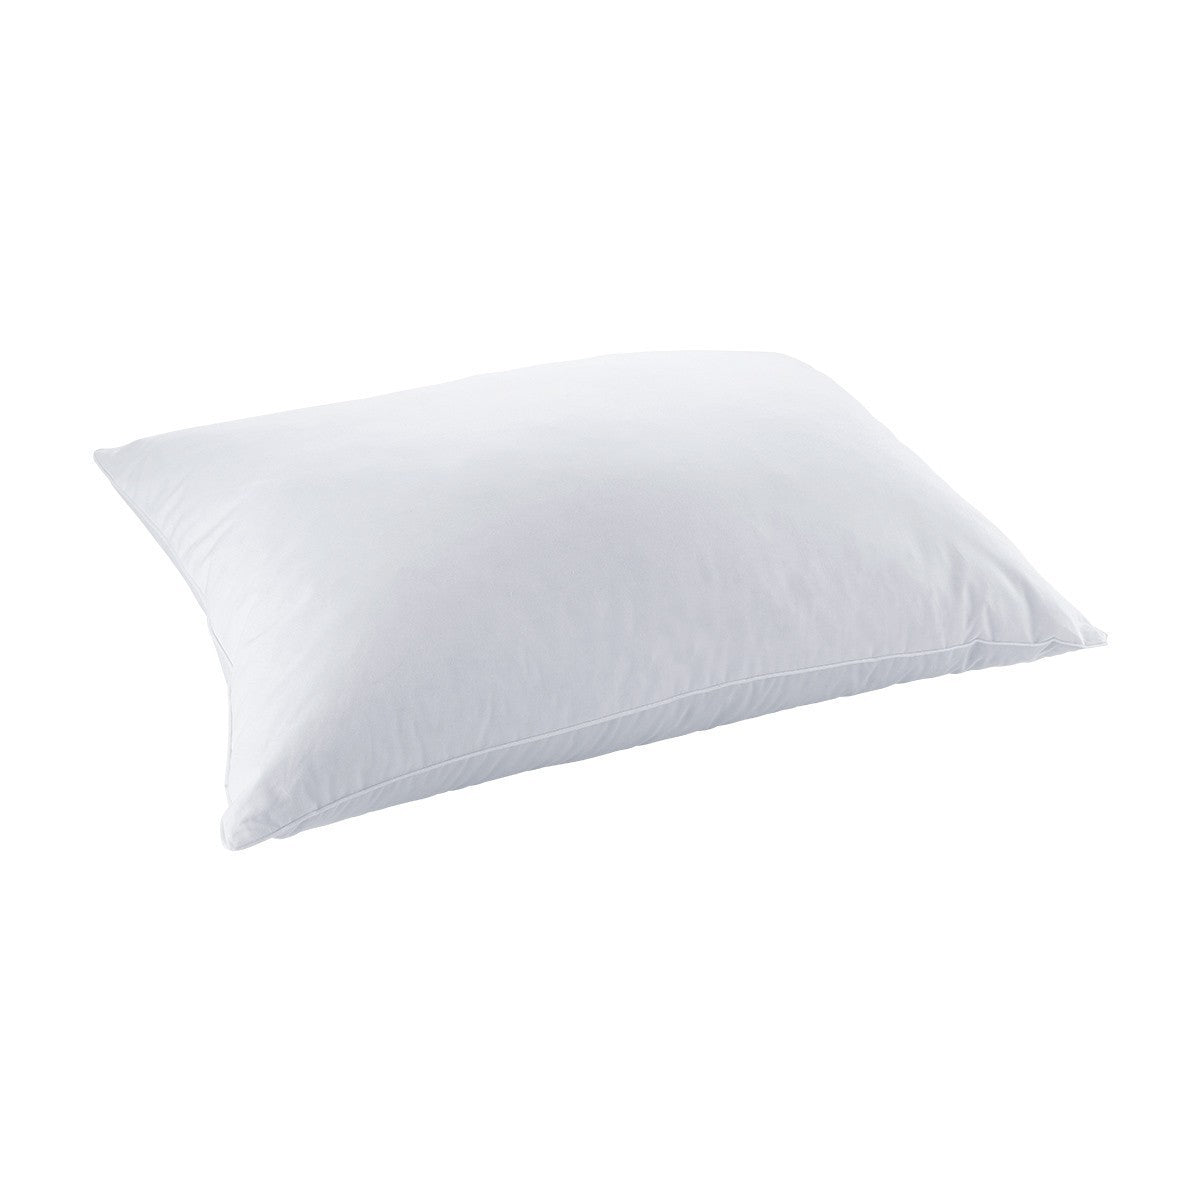 Yves Delorme 3-Chamber Down &amp; Feather Firm Pillow